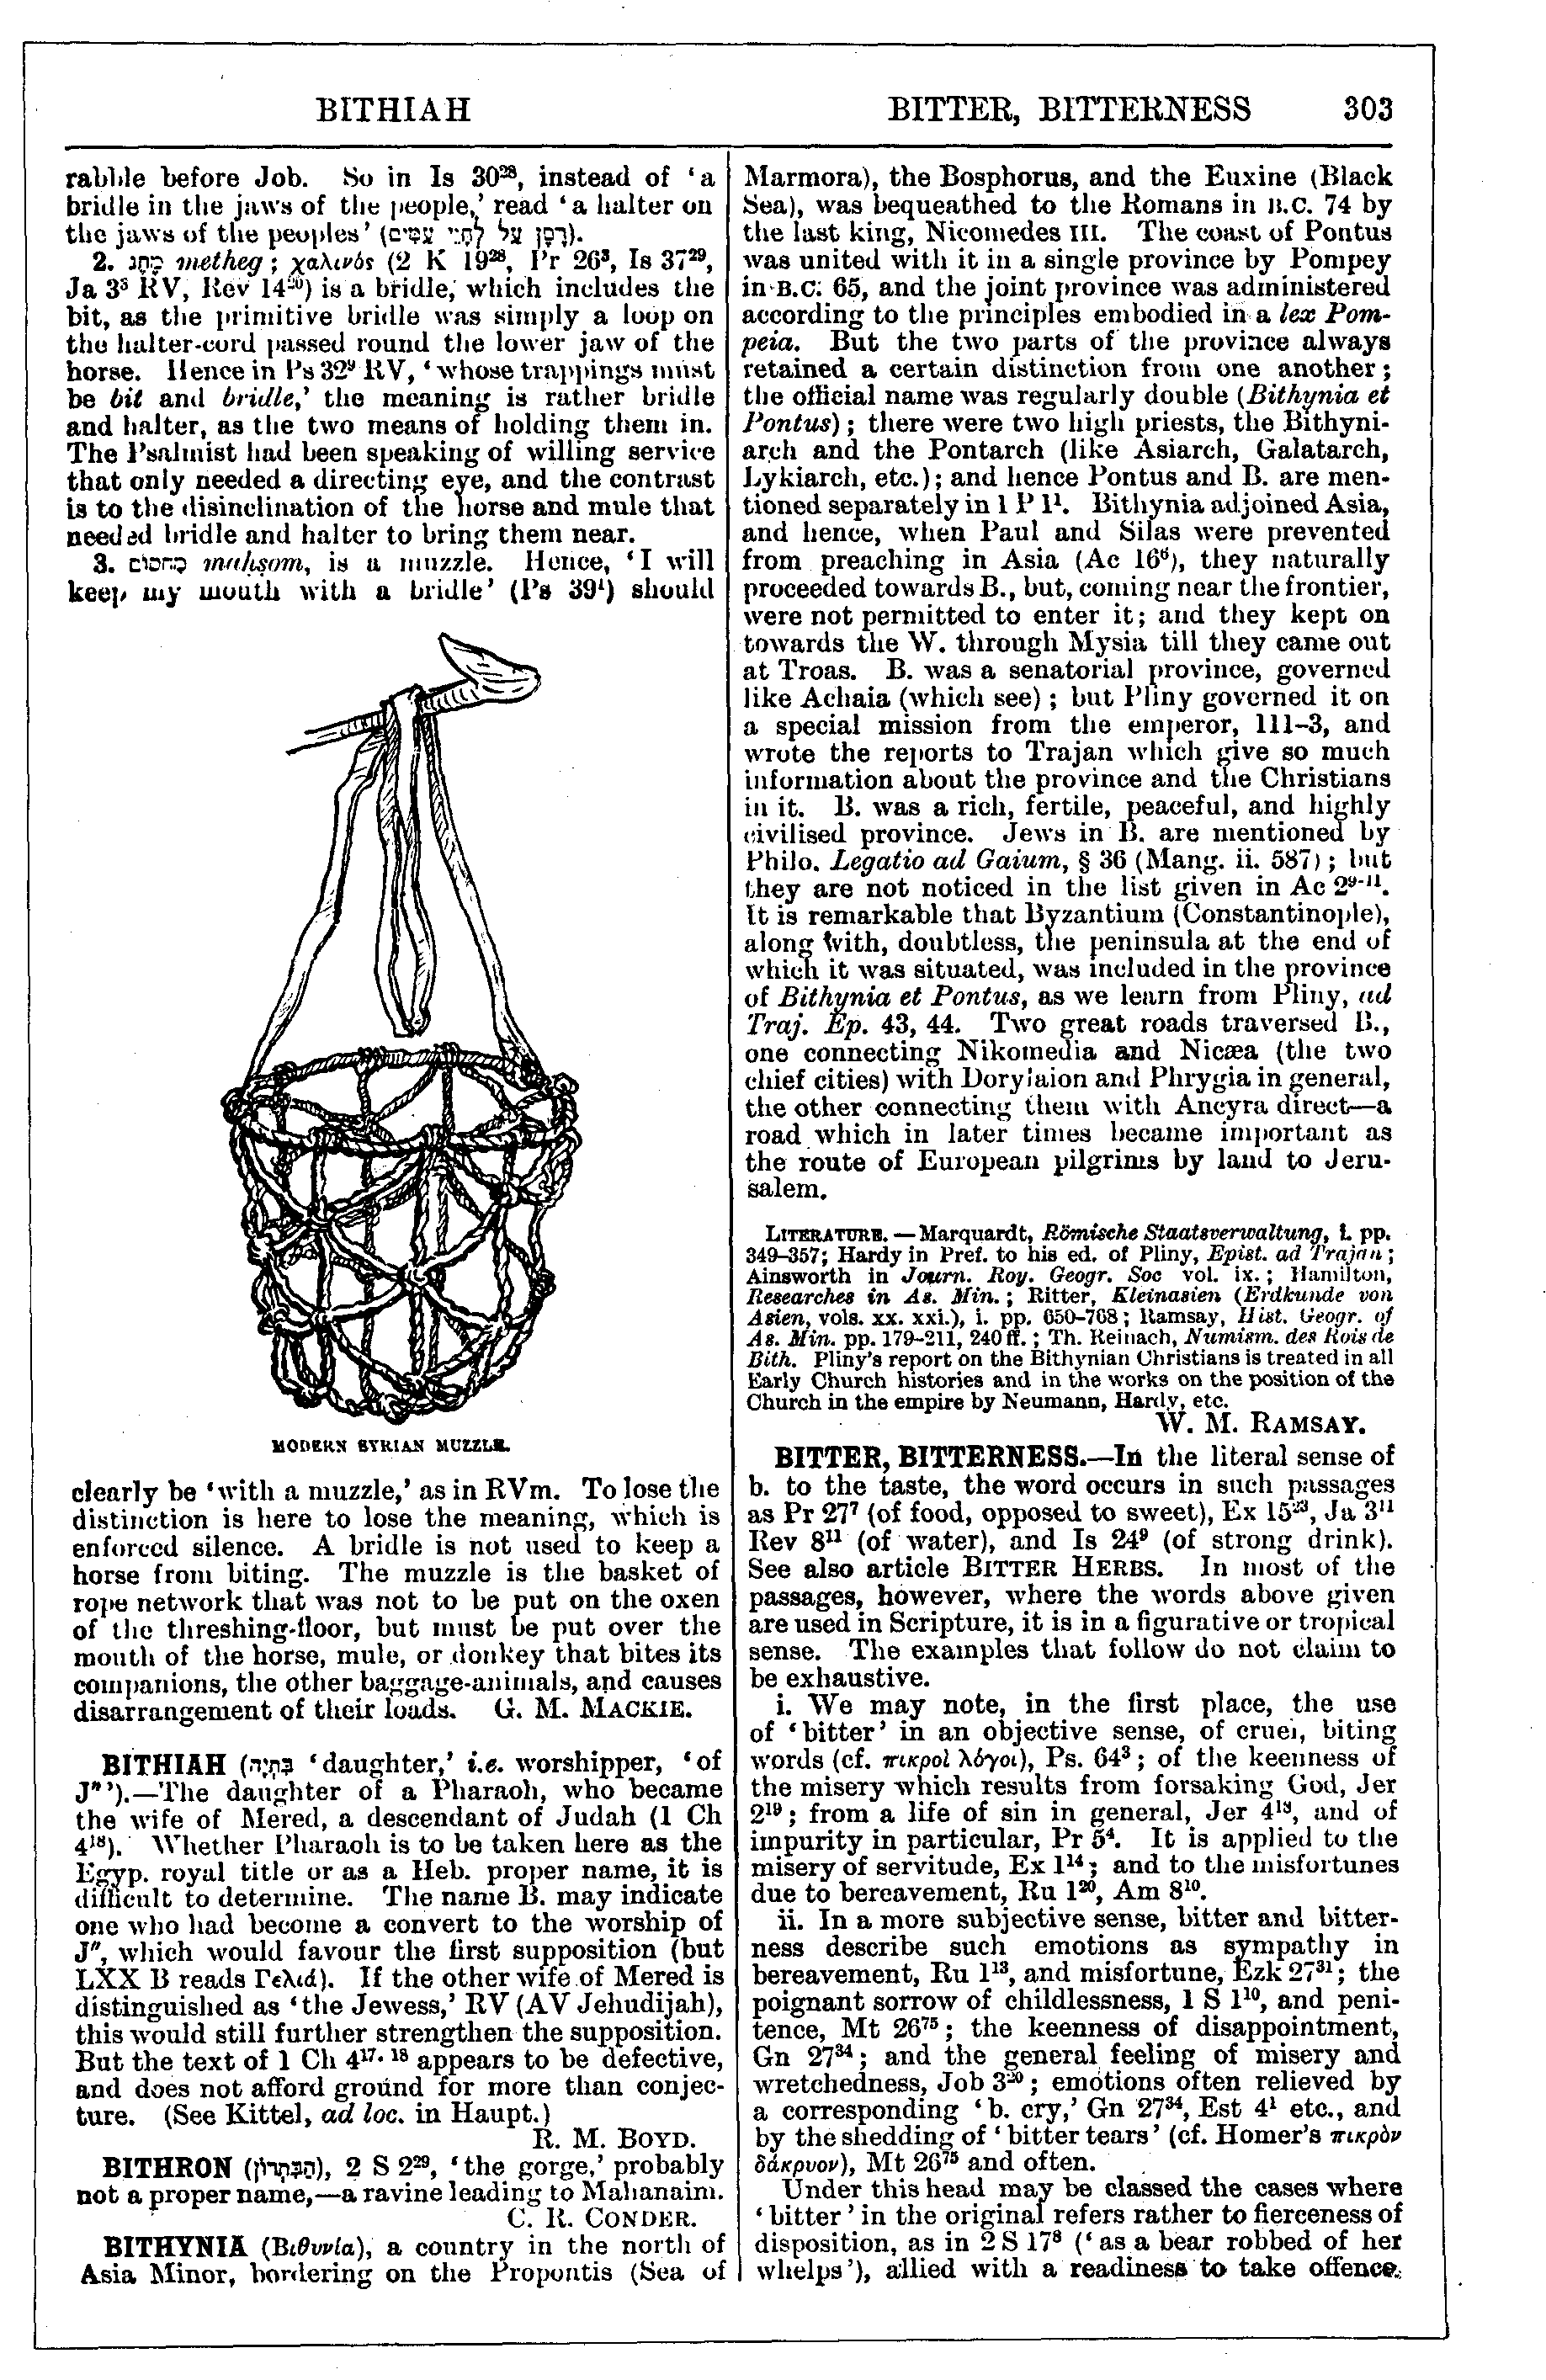 Image of page 303